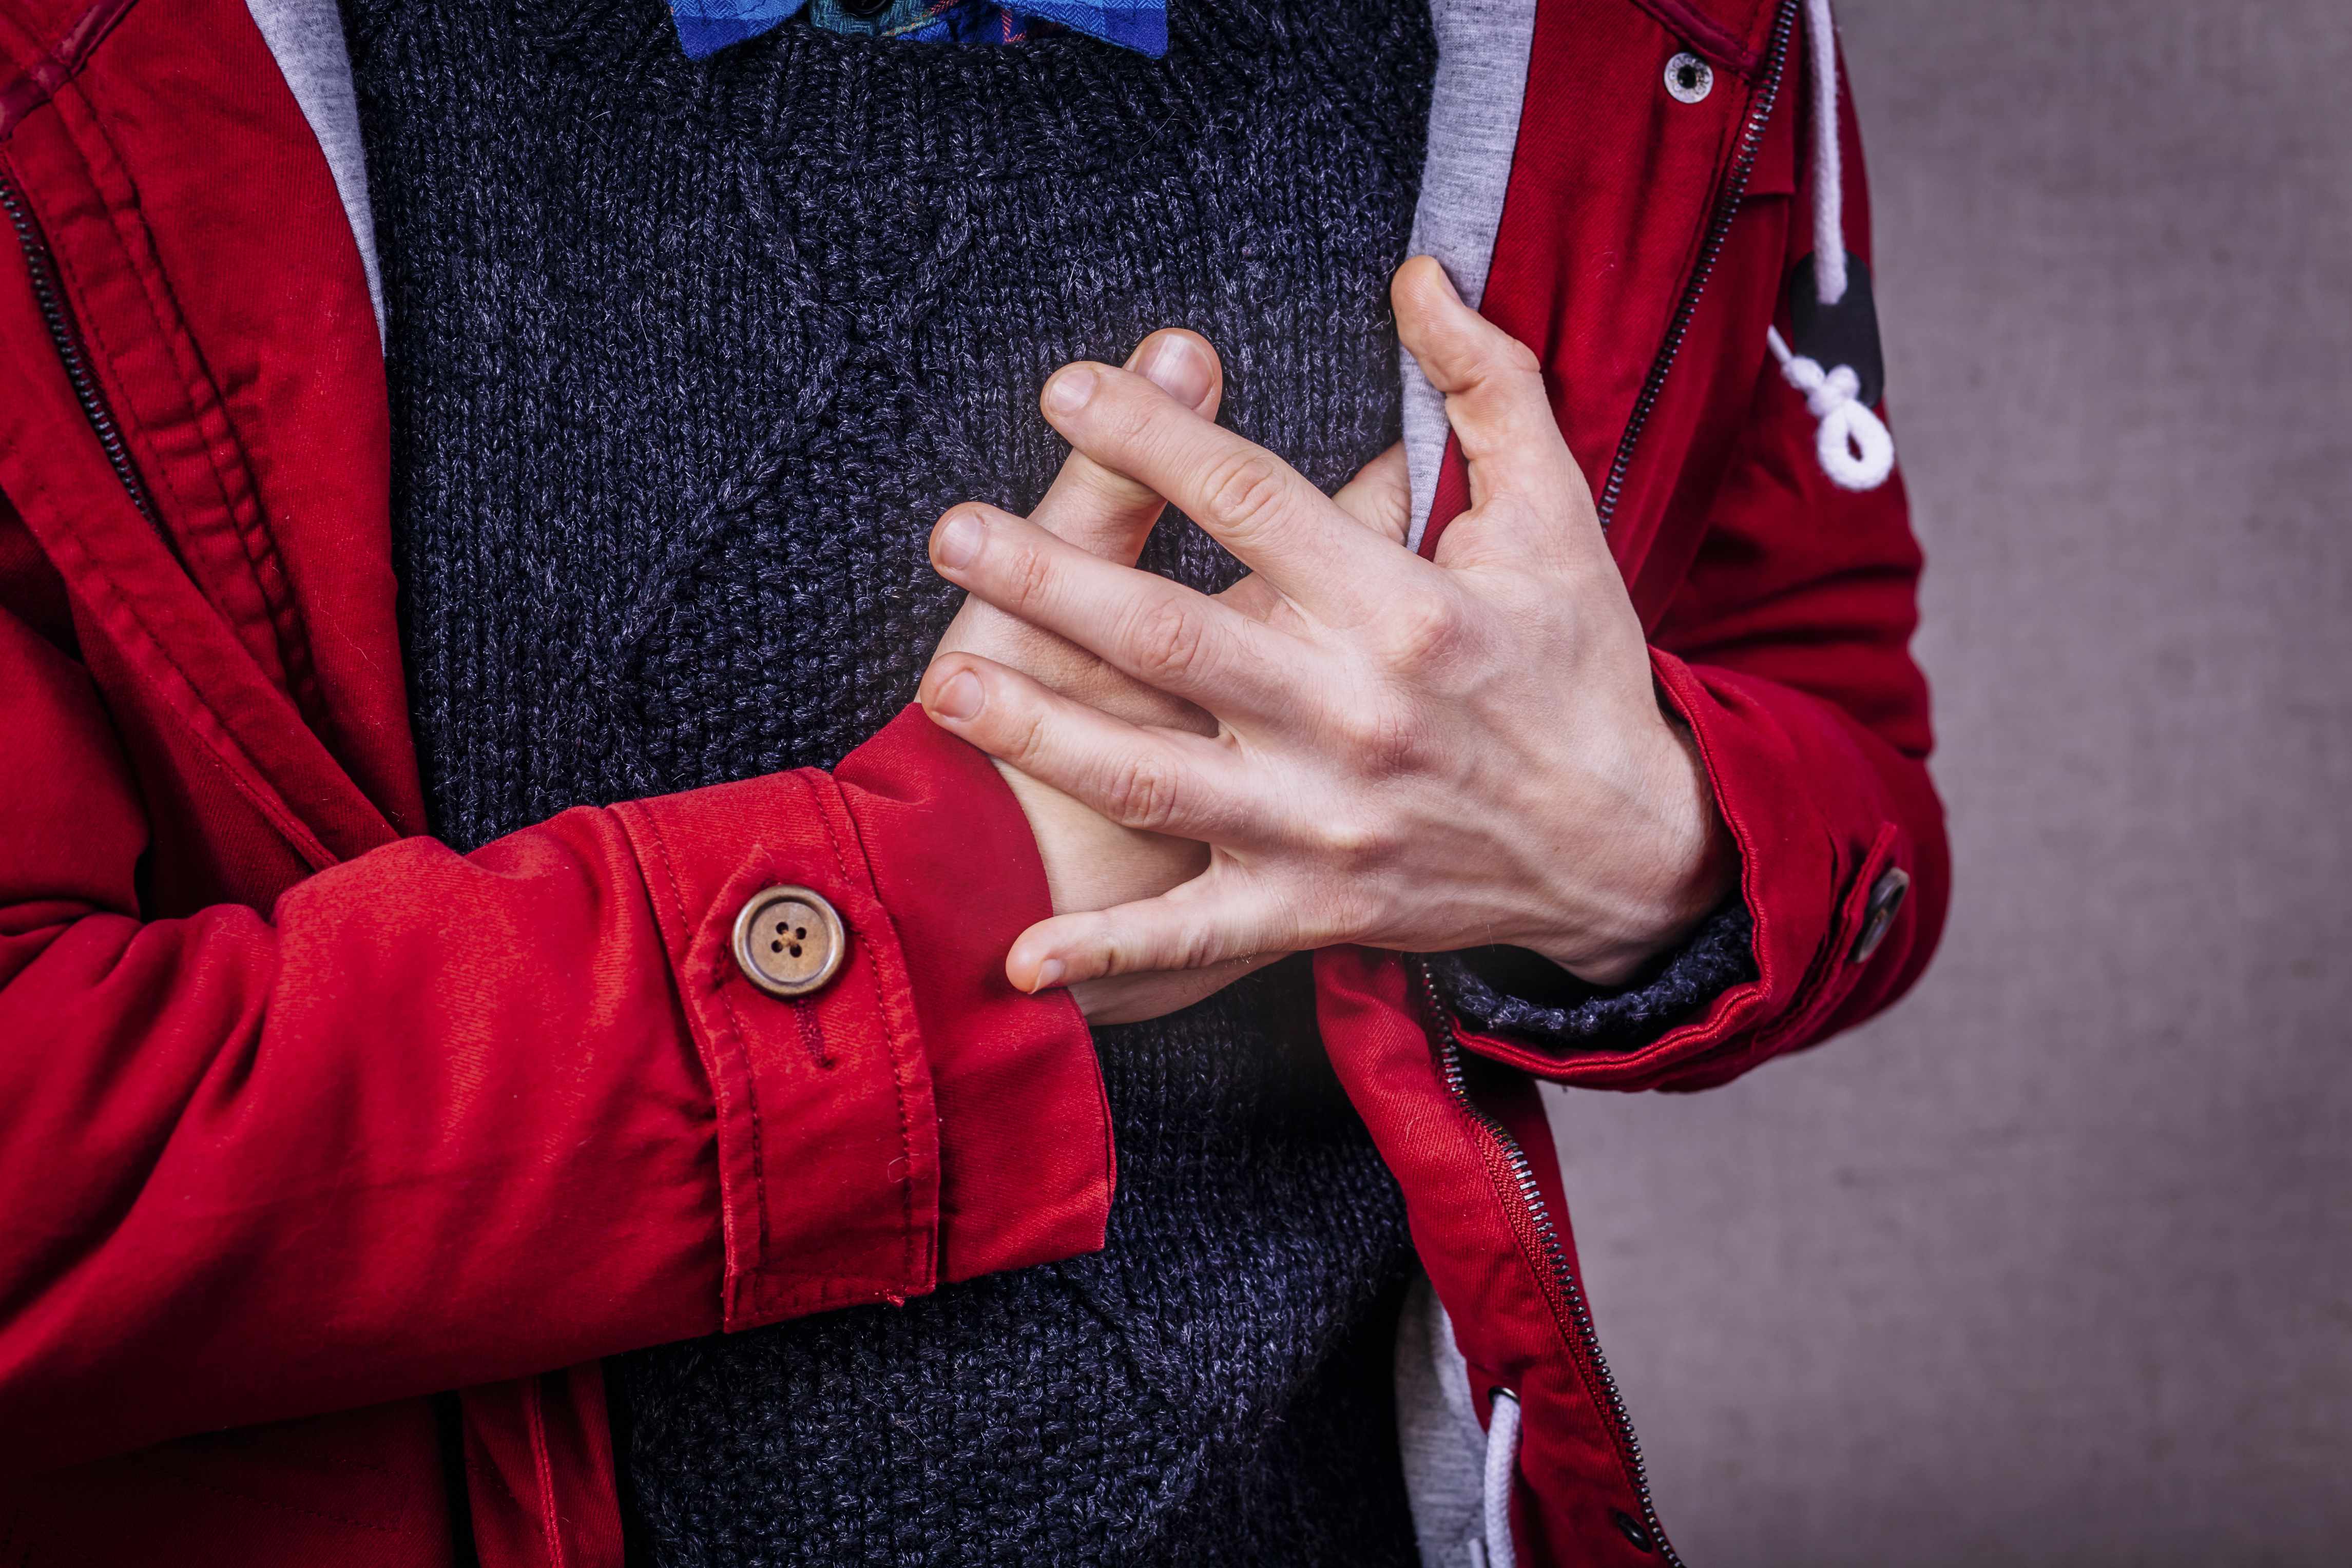 a person in a red coat holding chest with pain, perhaps a heart attack